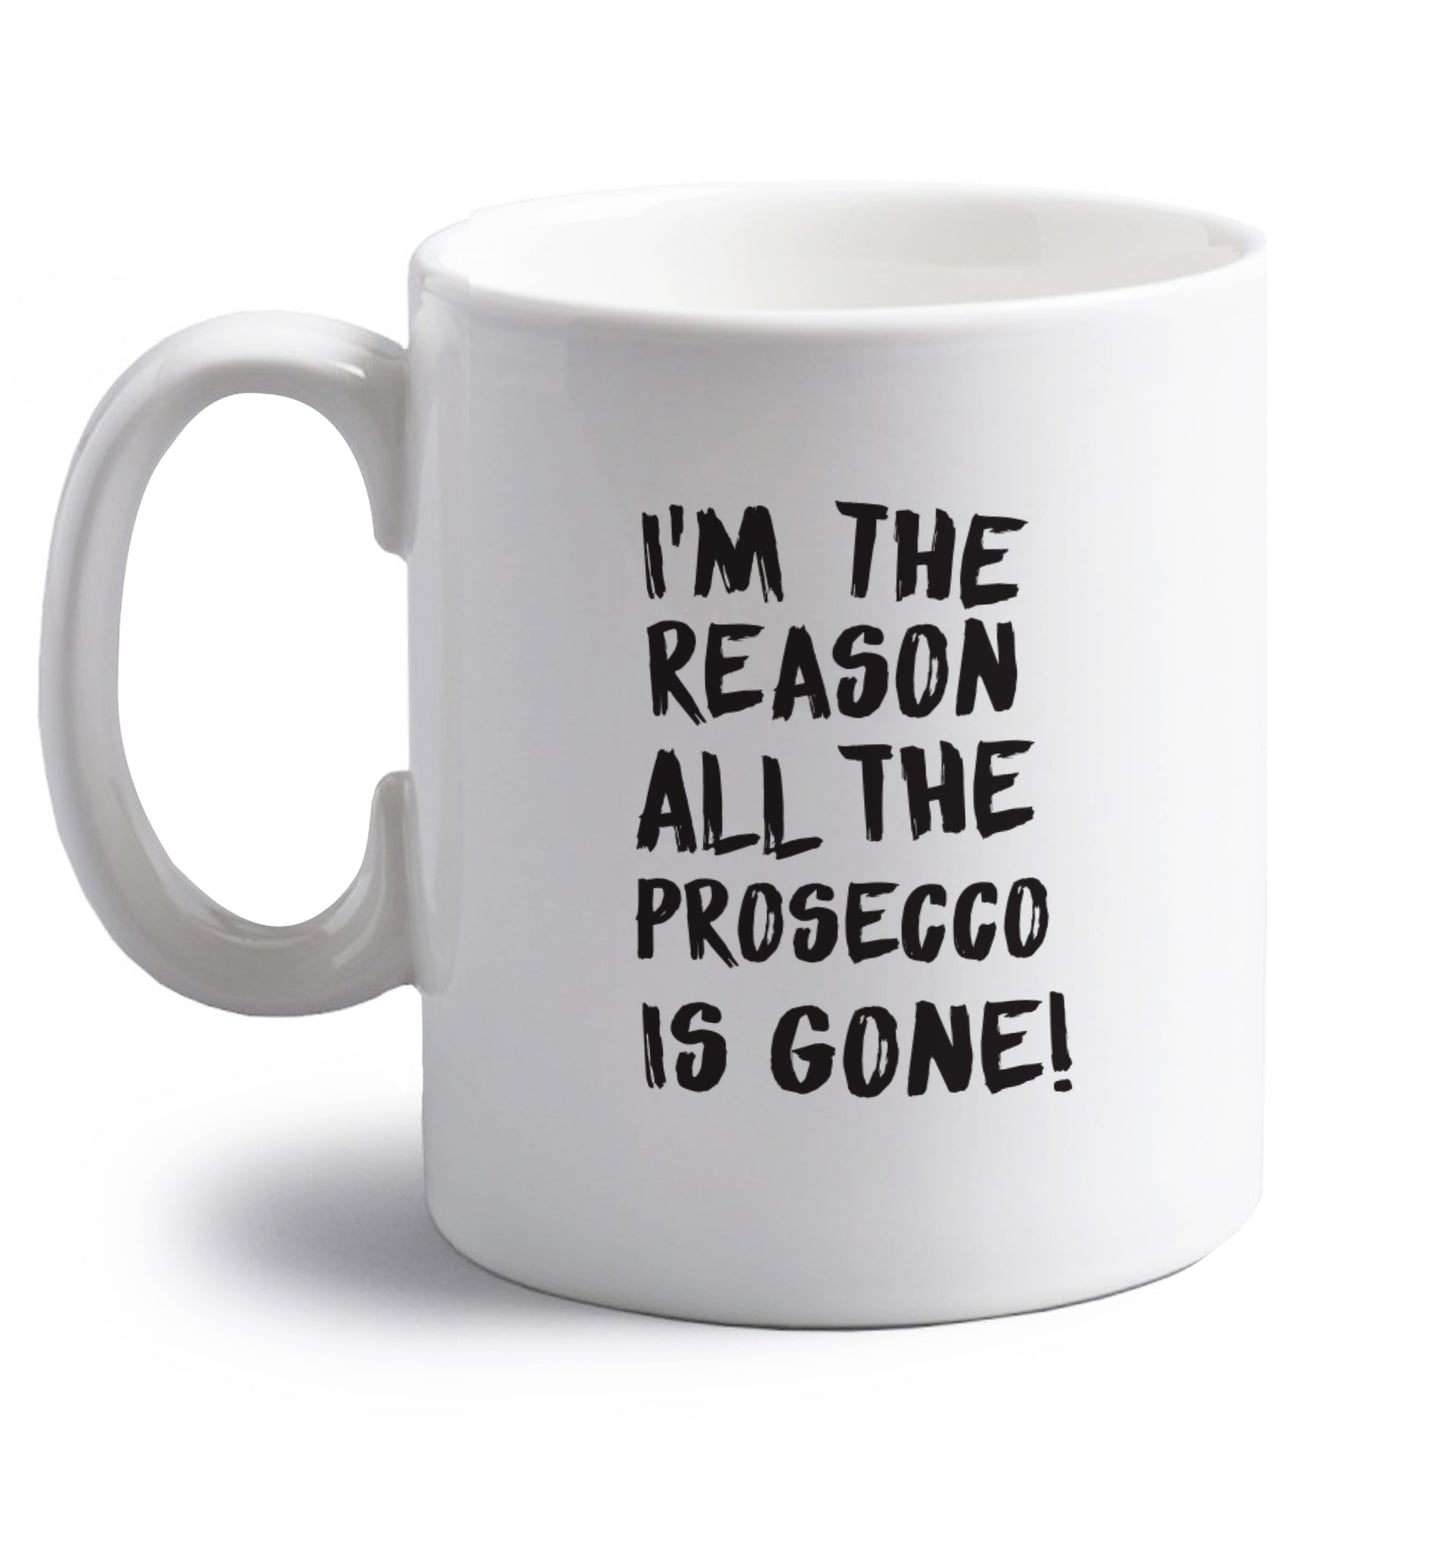 I'm the reason all the prosecco is gone right handed white ceramic mug 